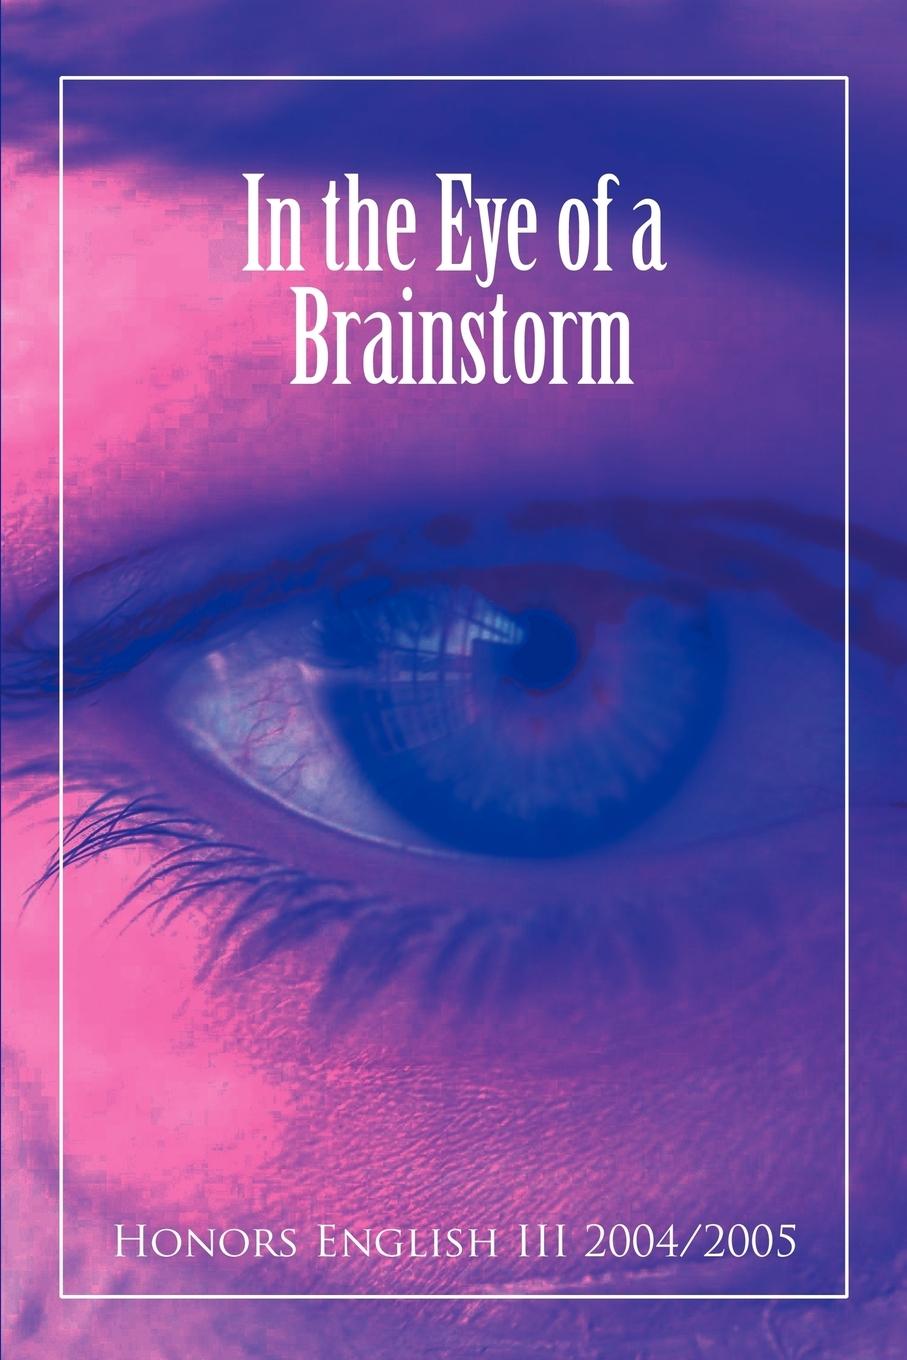 In the Eye of a Brainstorm - Honors English III 2004 2005